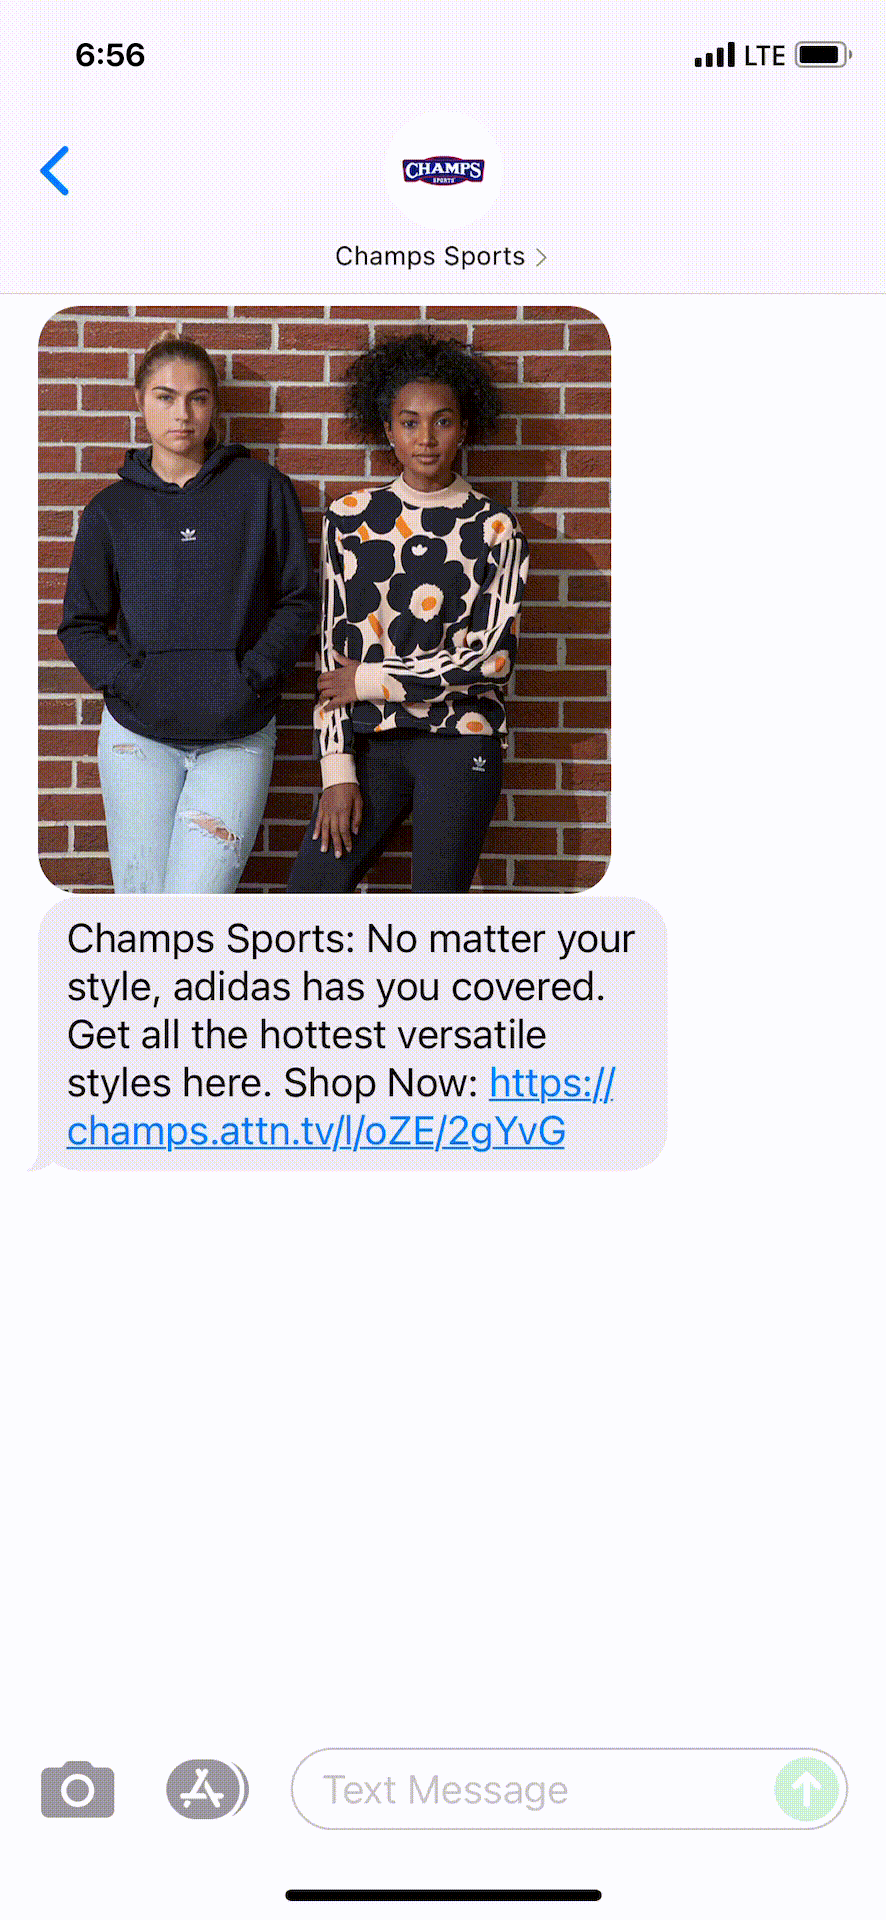 Champs-Sports-Text-Message-Marketing-Example-08.09.2021